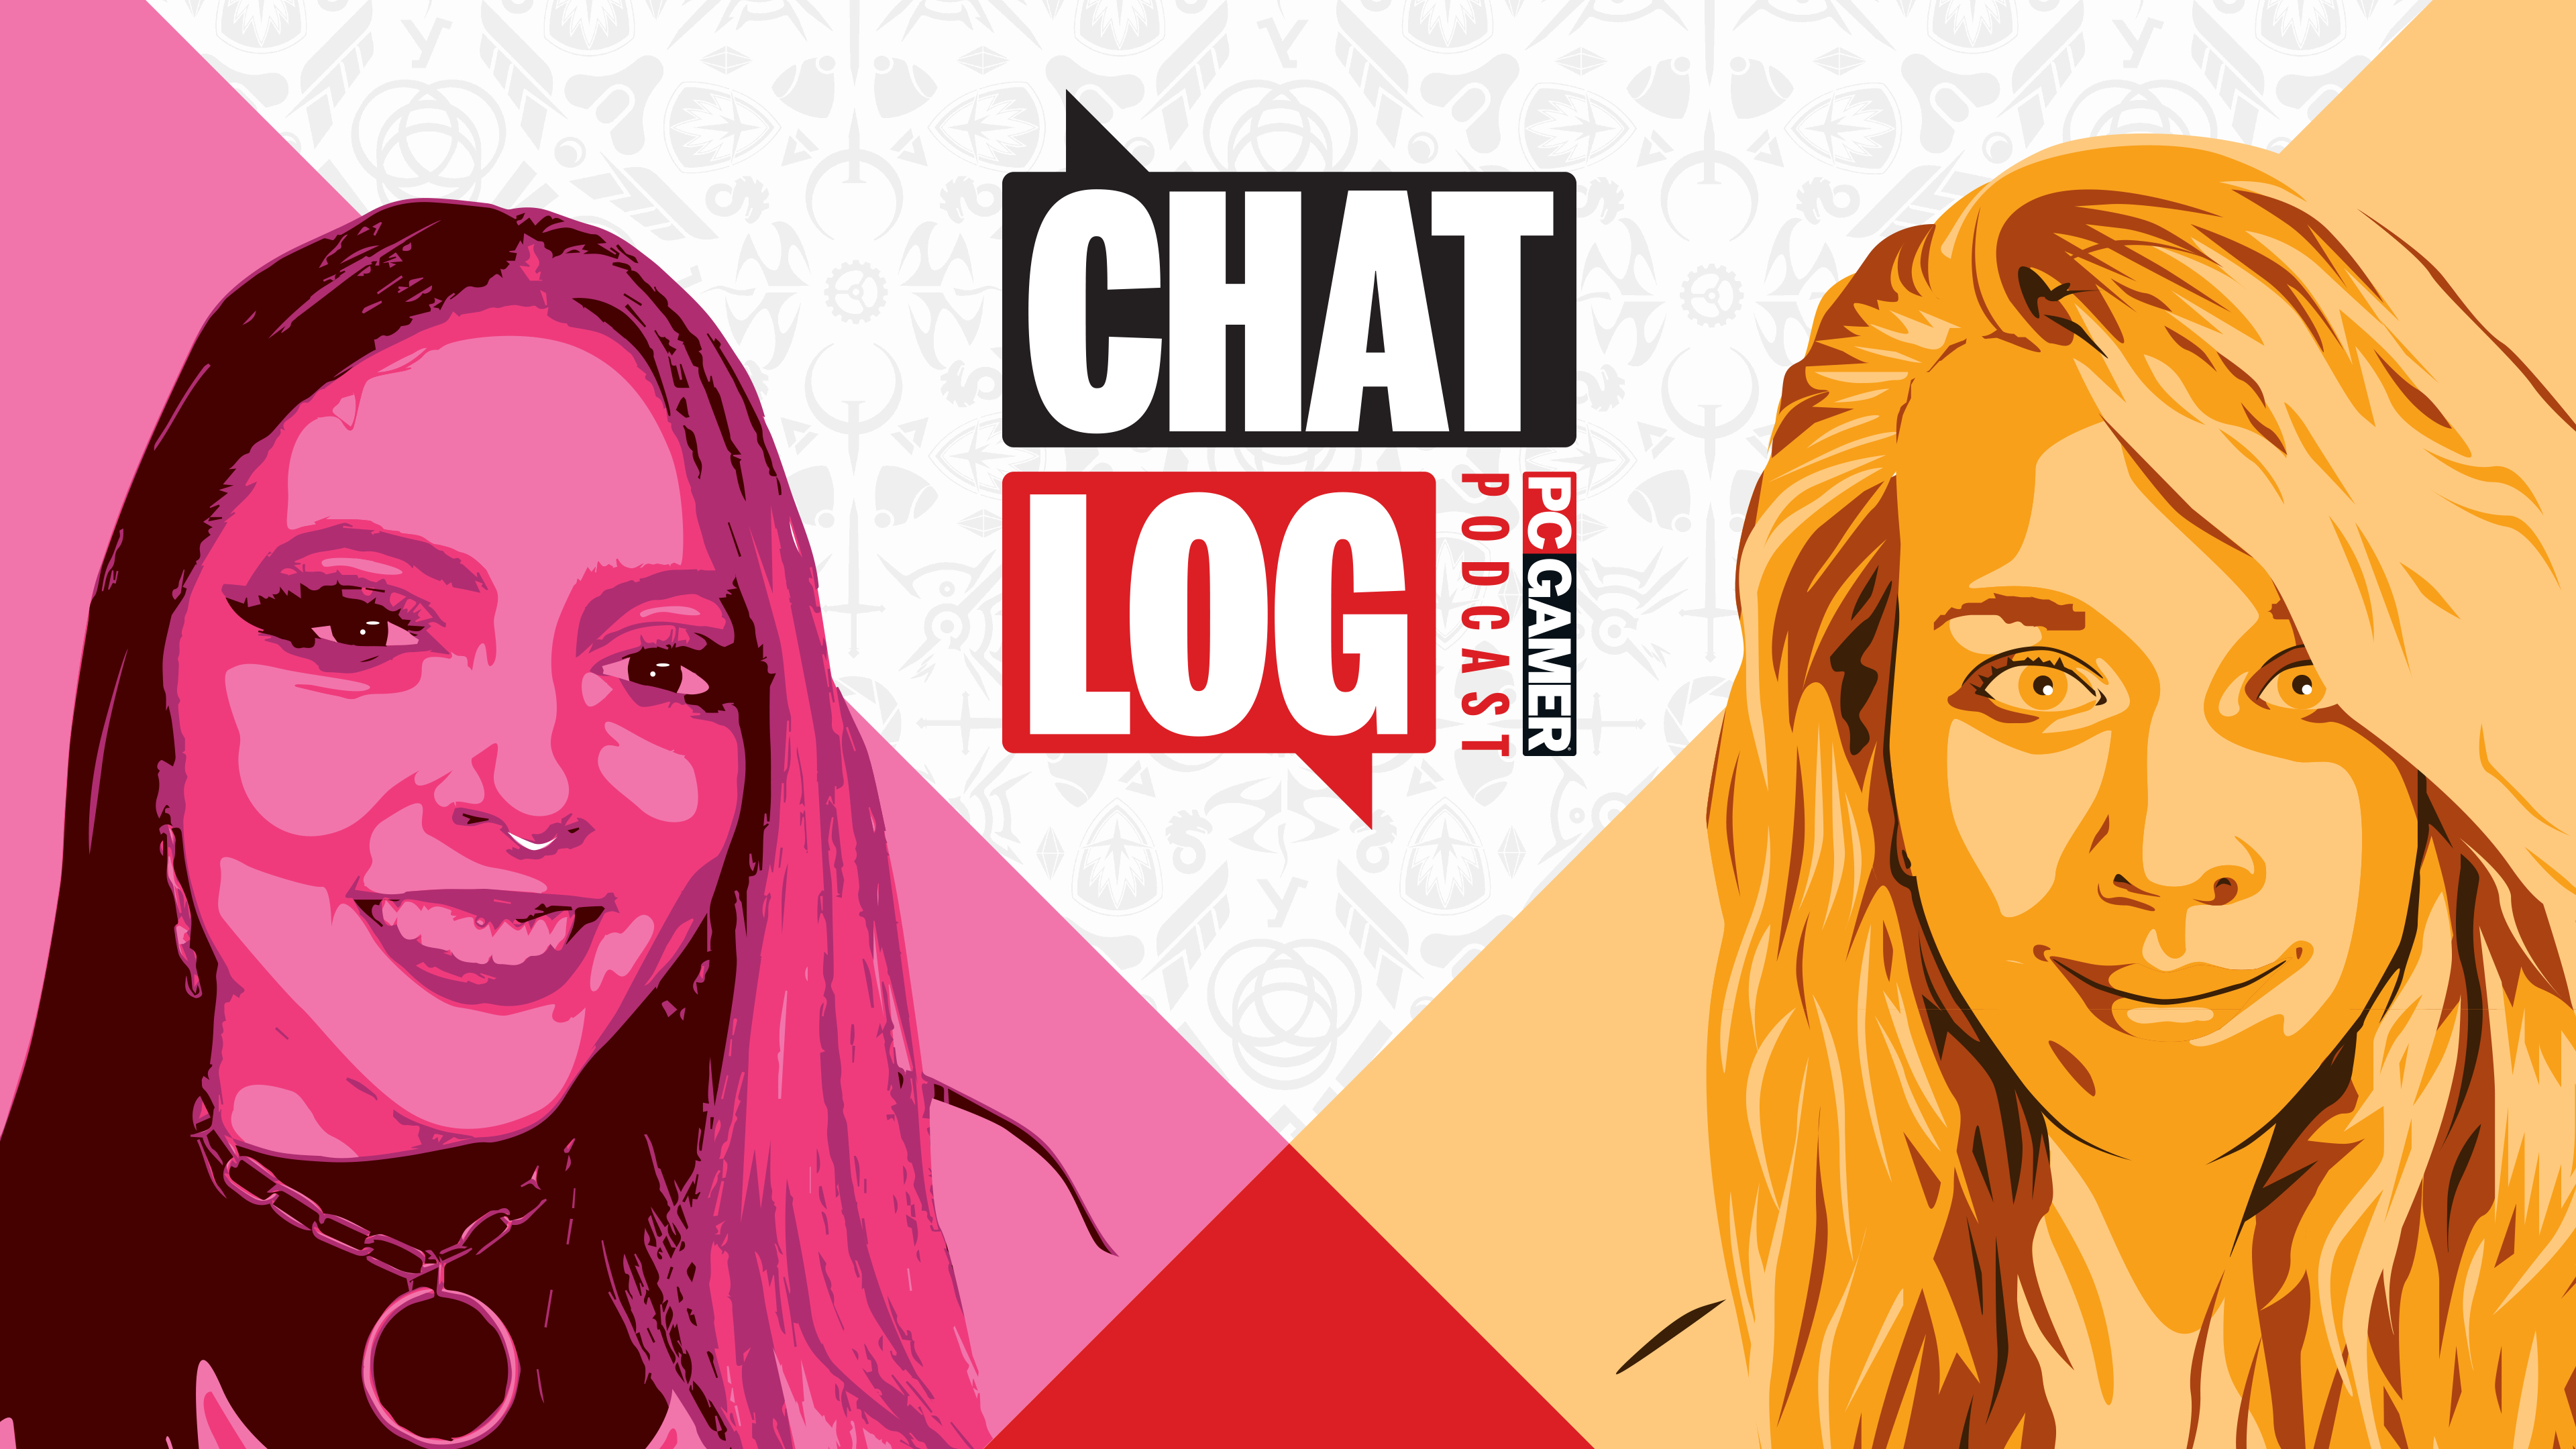  PC Gamer Chat Log Episode 48: What's that Steam review? 